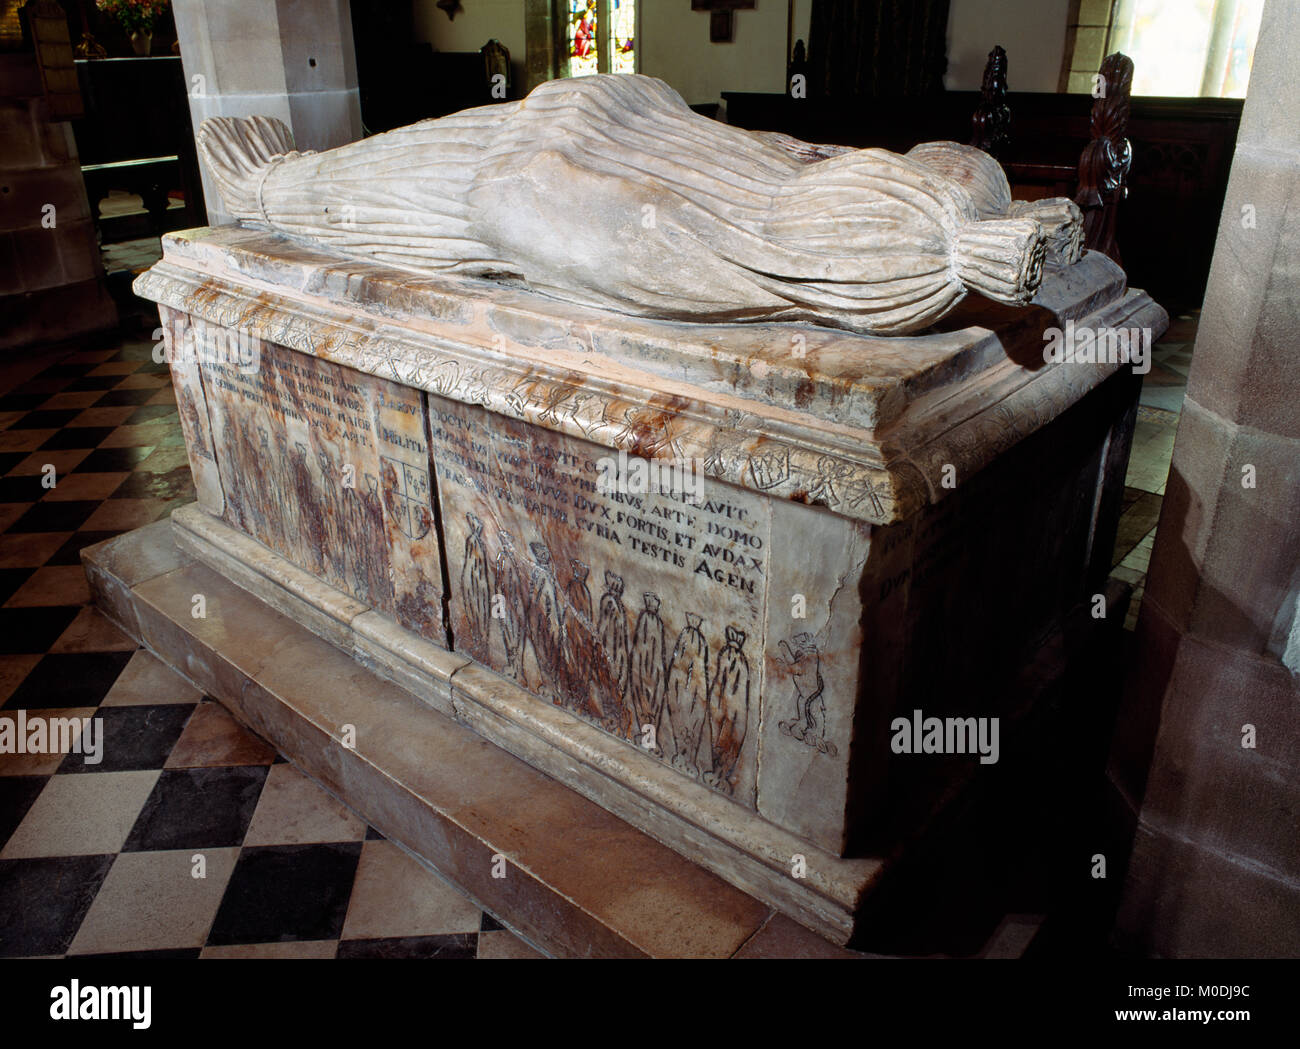 16th century alabaster tomb of Thomas Beresford & his wife Agnes Hassall depicted as recumbent shrouded effigies, Fenny Bentley church, Derbyshire, UK Stock Photo